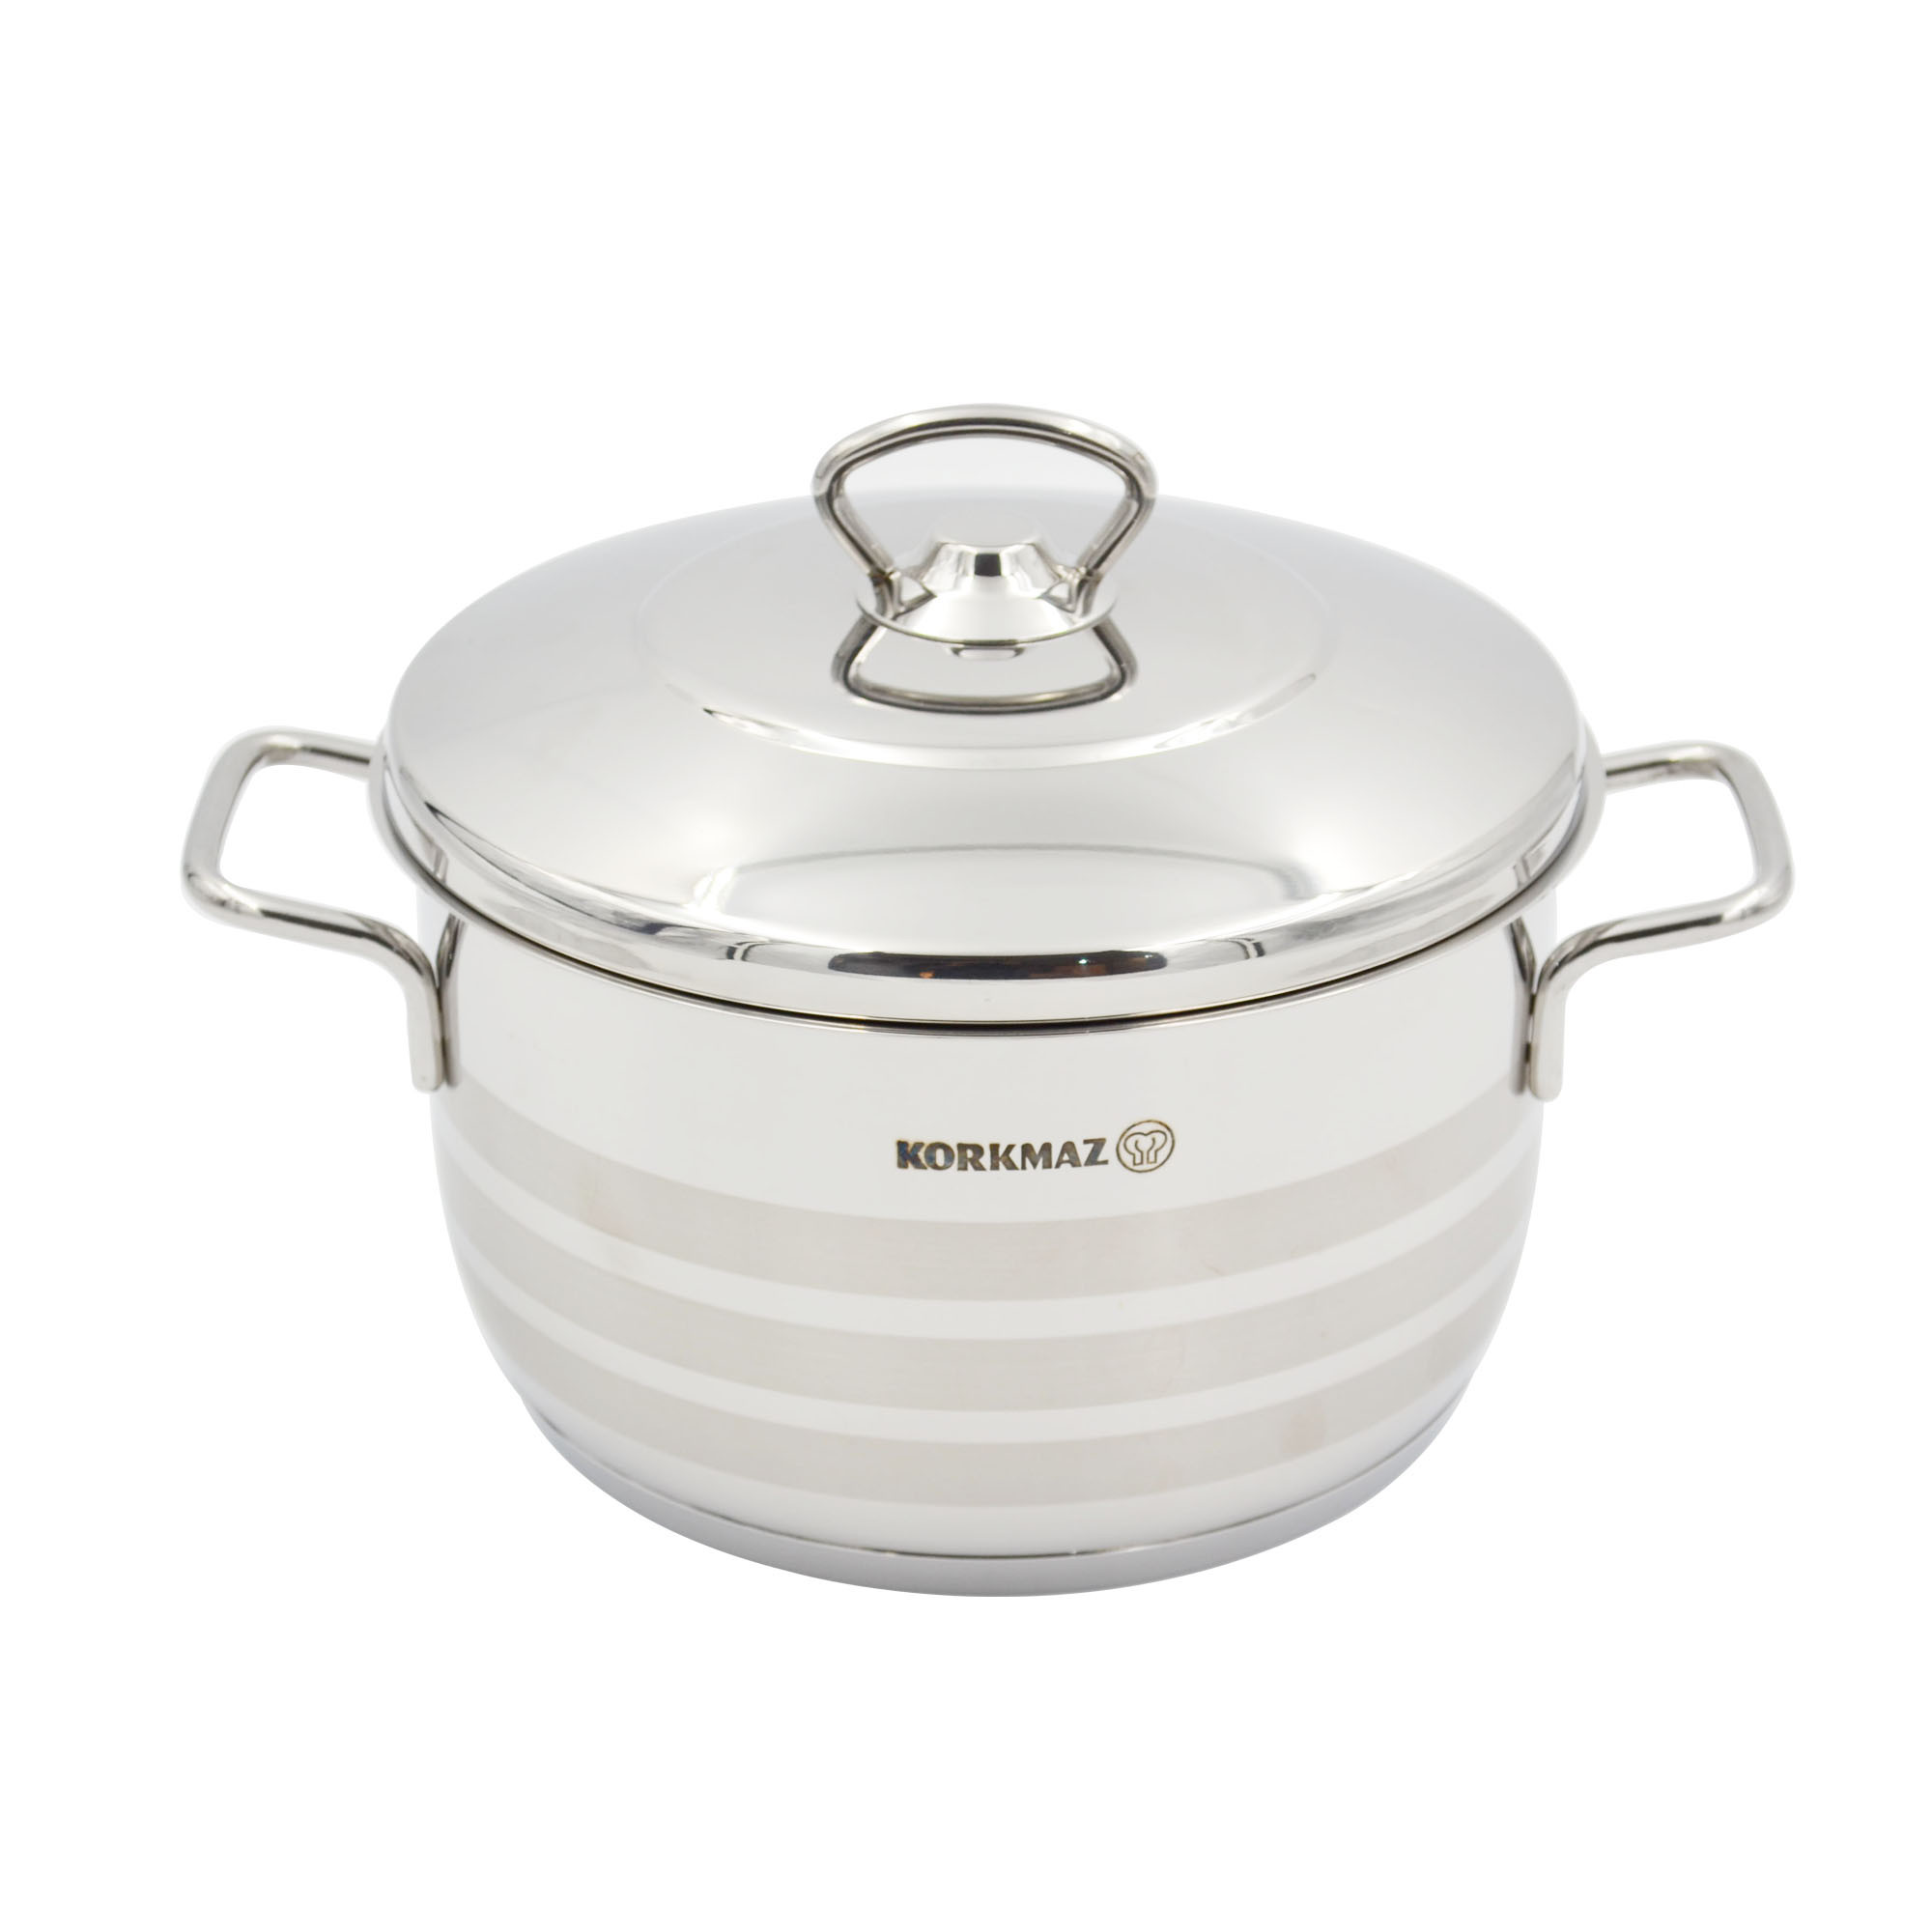  Astra Stainless steel Casserole 16x10 cm / 2.0 l.